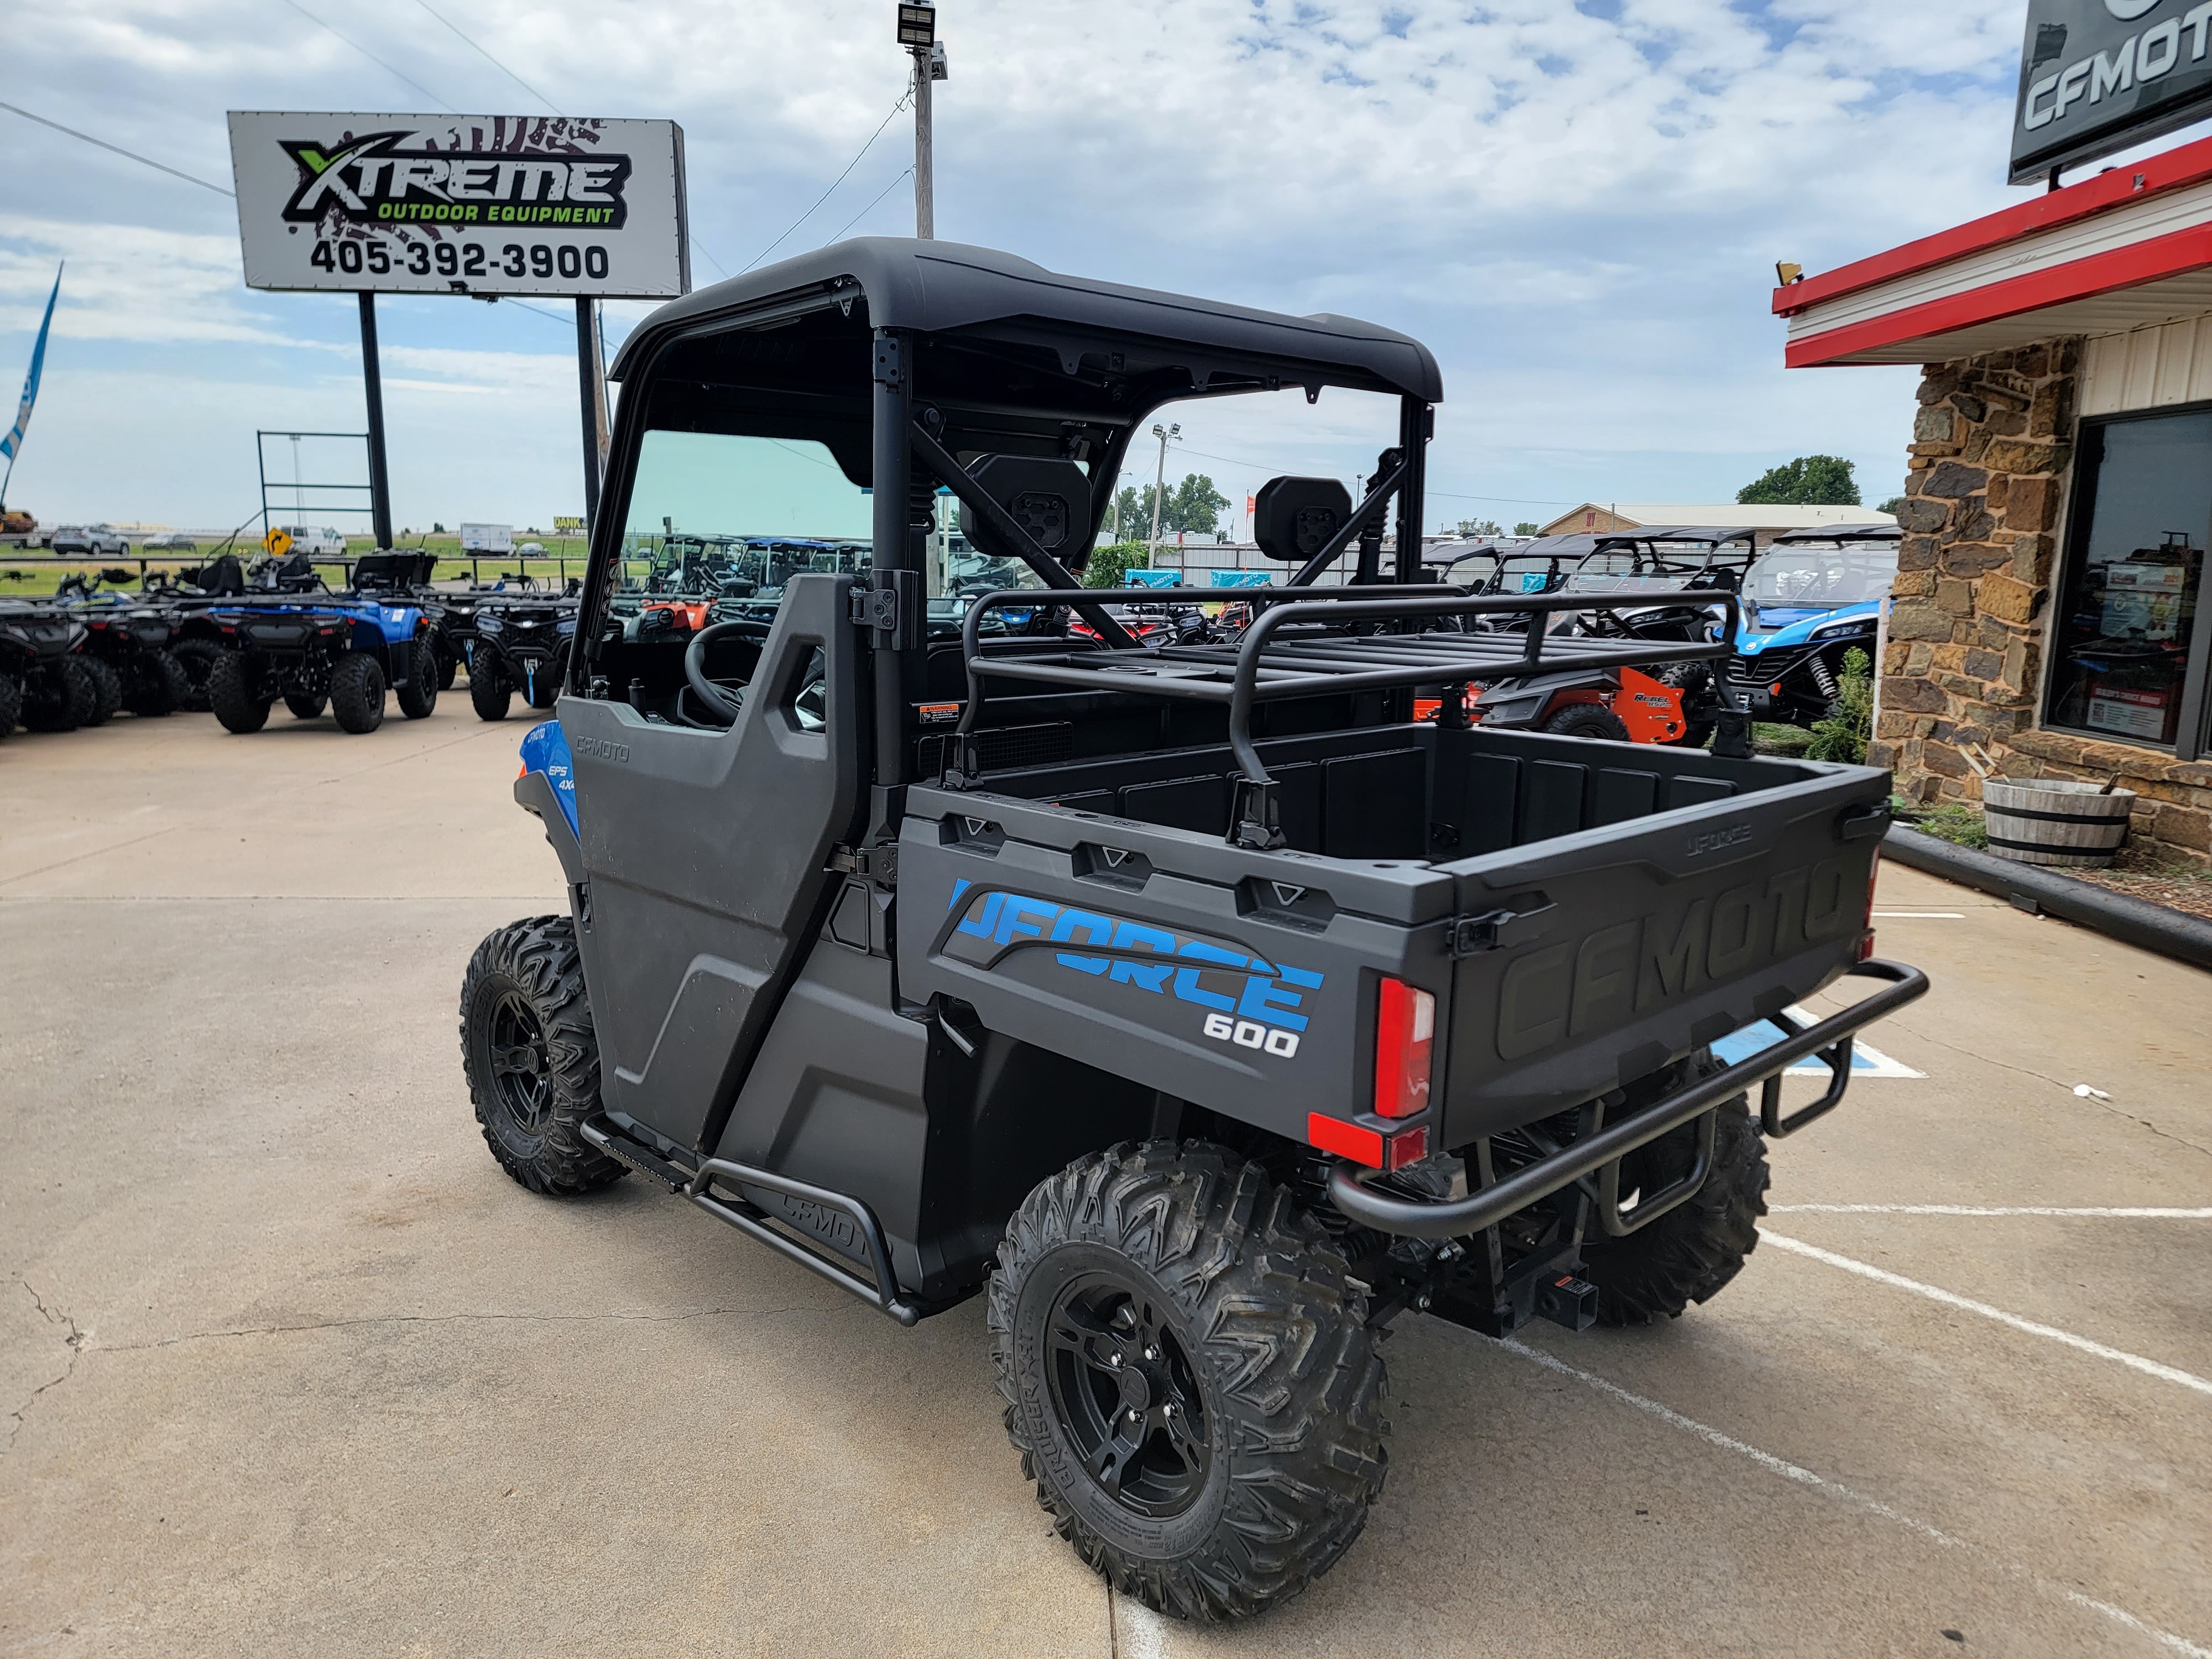 2023 CFMOTO UFORCE 600 at Xtreme Outdoor Equipment